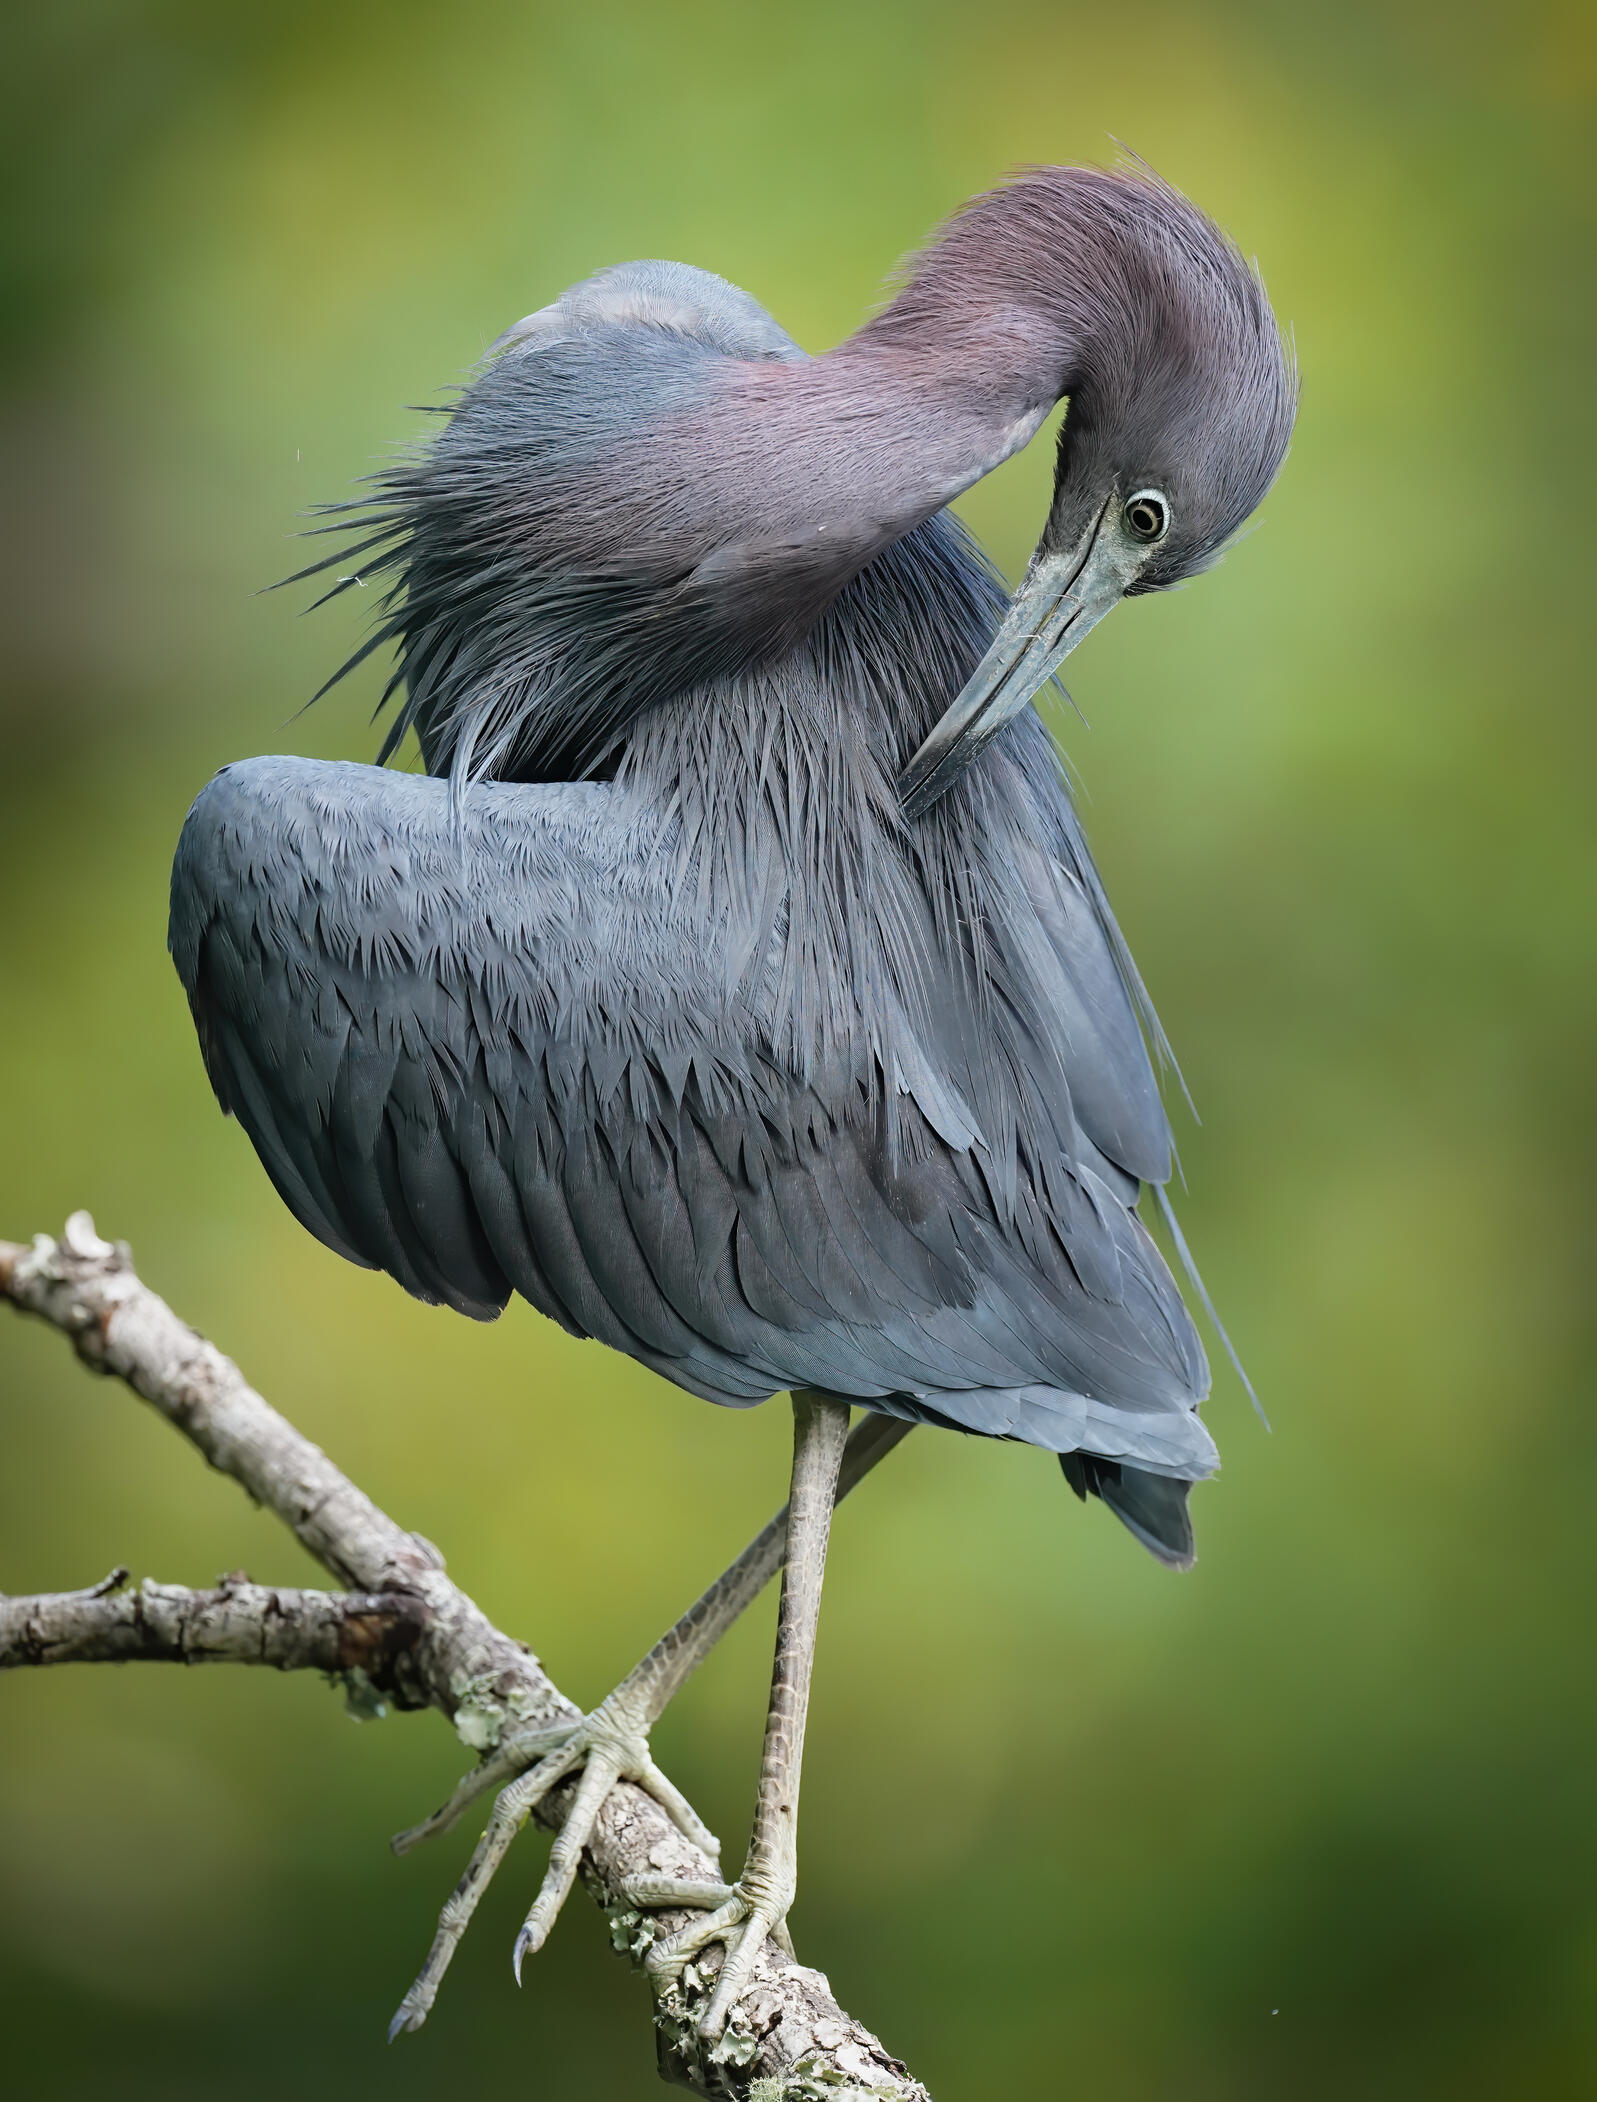 Little Blue Heron standing on a bare branch.